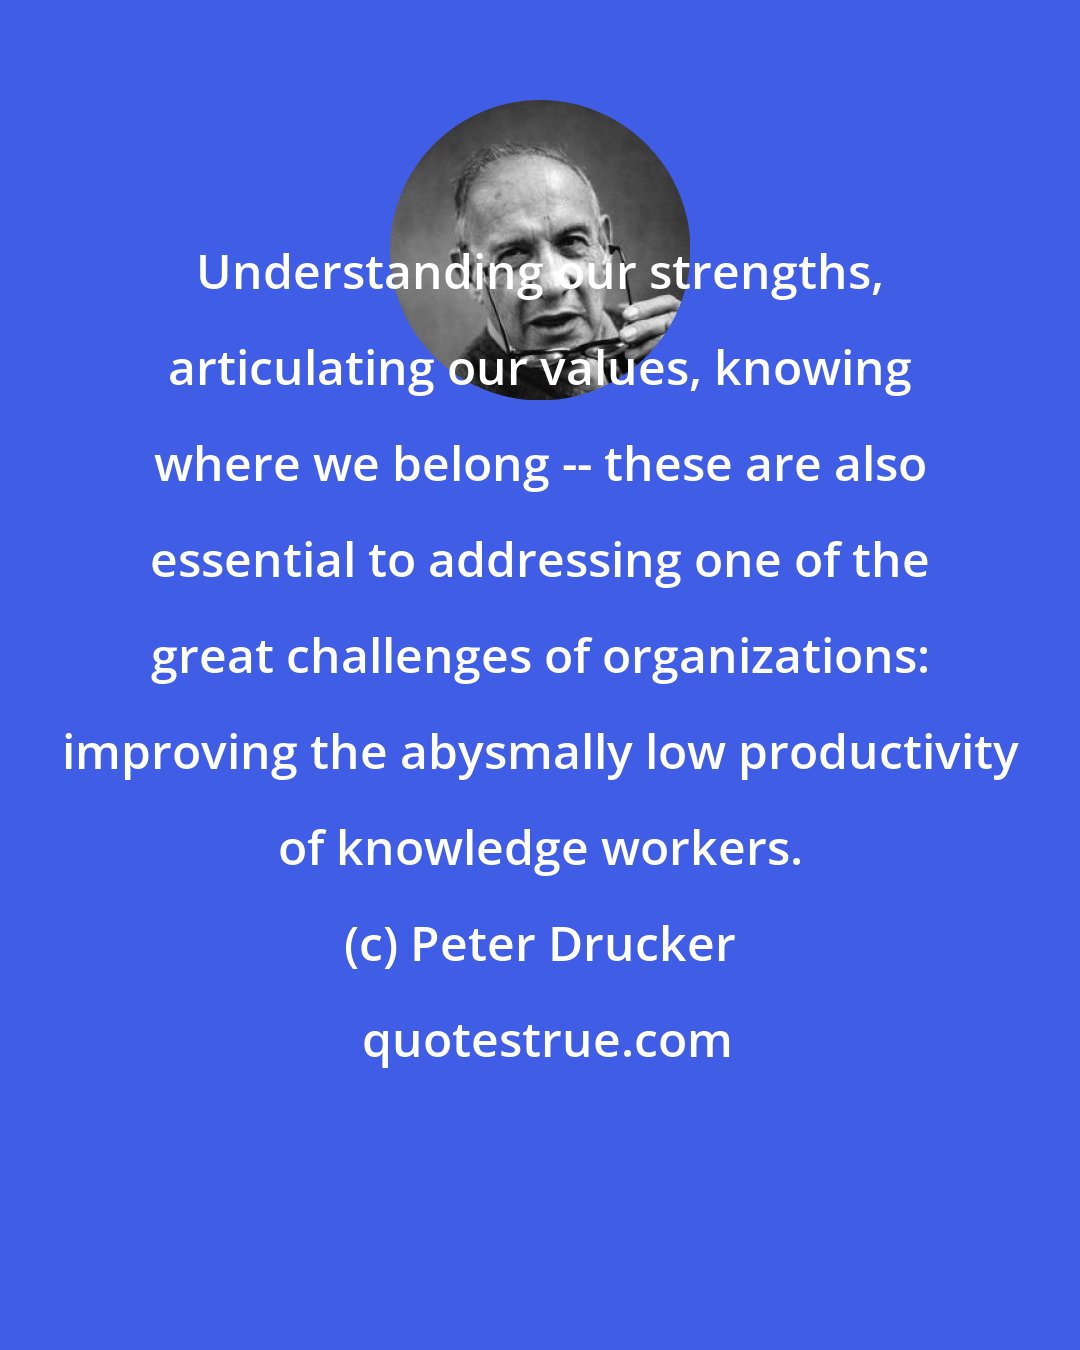 Peter Drucker: Understanding our strengths, articulating our values, knowing where we belong -- these are also essential to addressing one of the great challenges of organizations: improving the abysmally low productivity of knowledge workers.